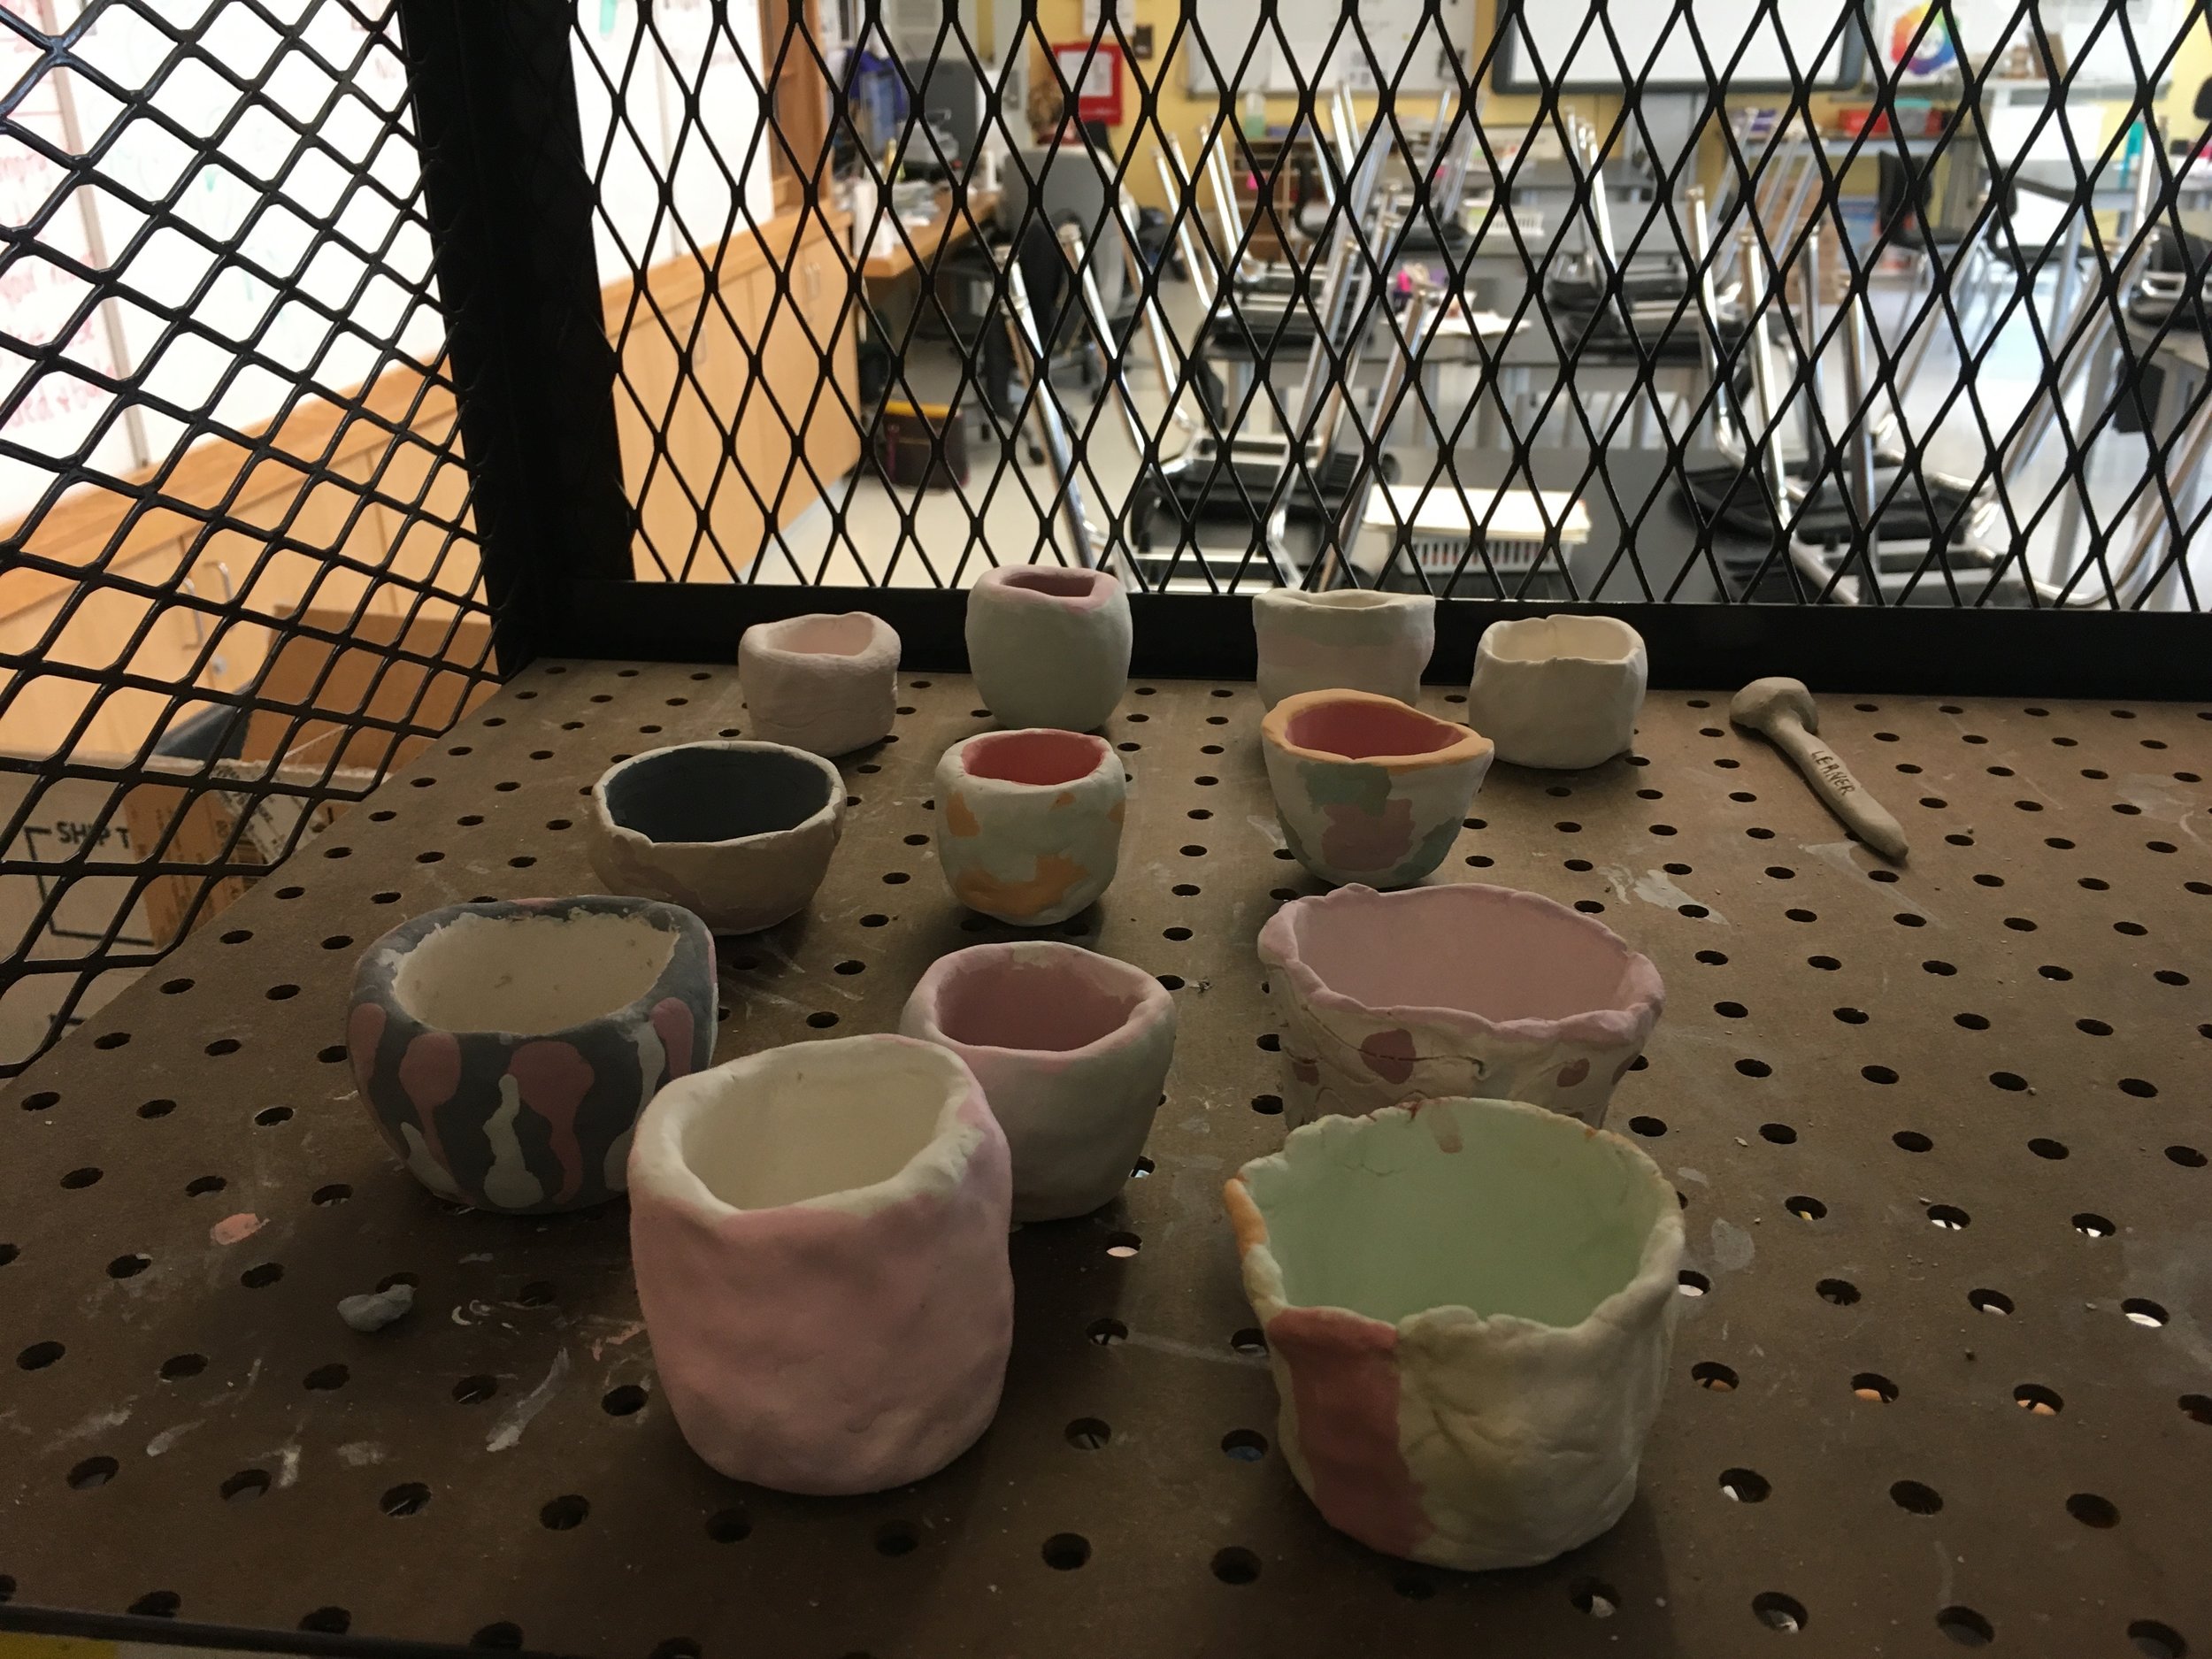 The Clinton School for Writers and Artists, 6th grade ceramic student work, 2017